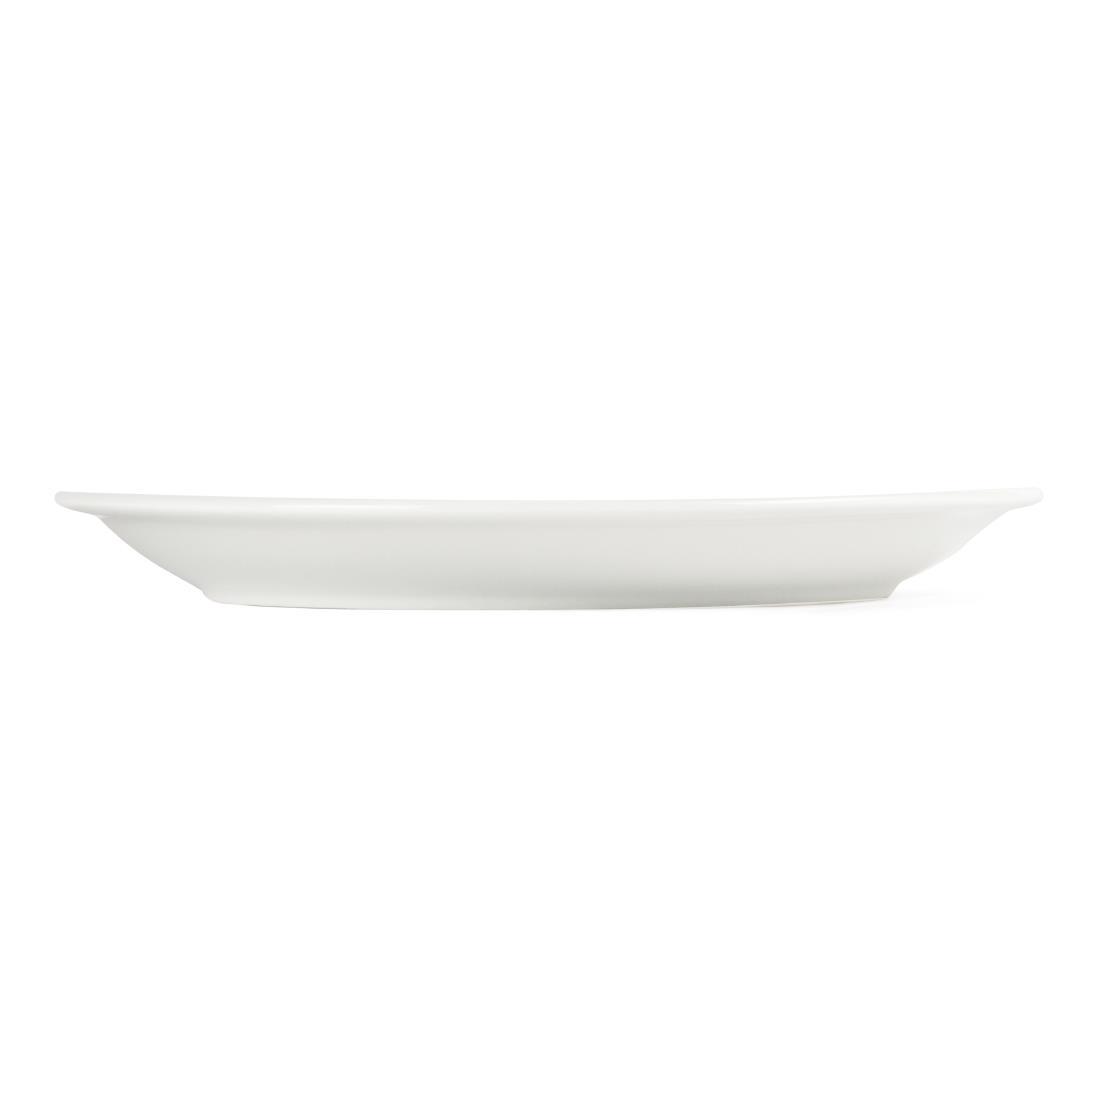 Olympia Whiteware Narrow Rimmed Plates 250mm (Pack of 12) - CB490  - 2